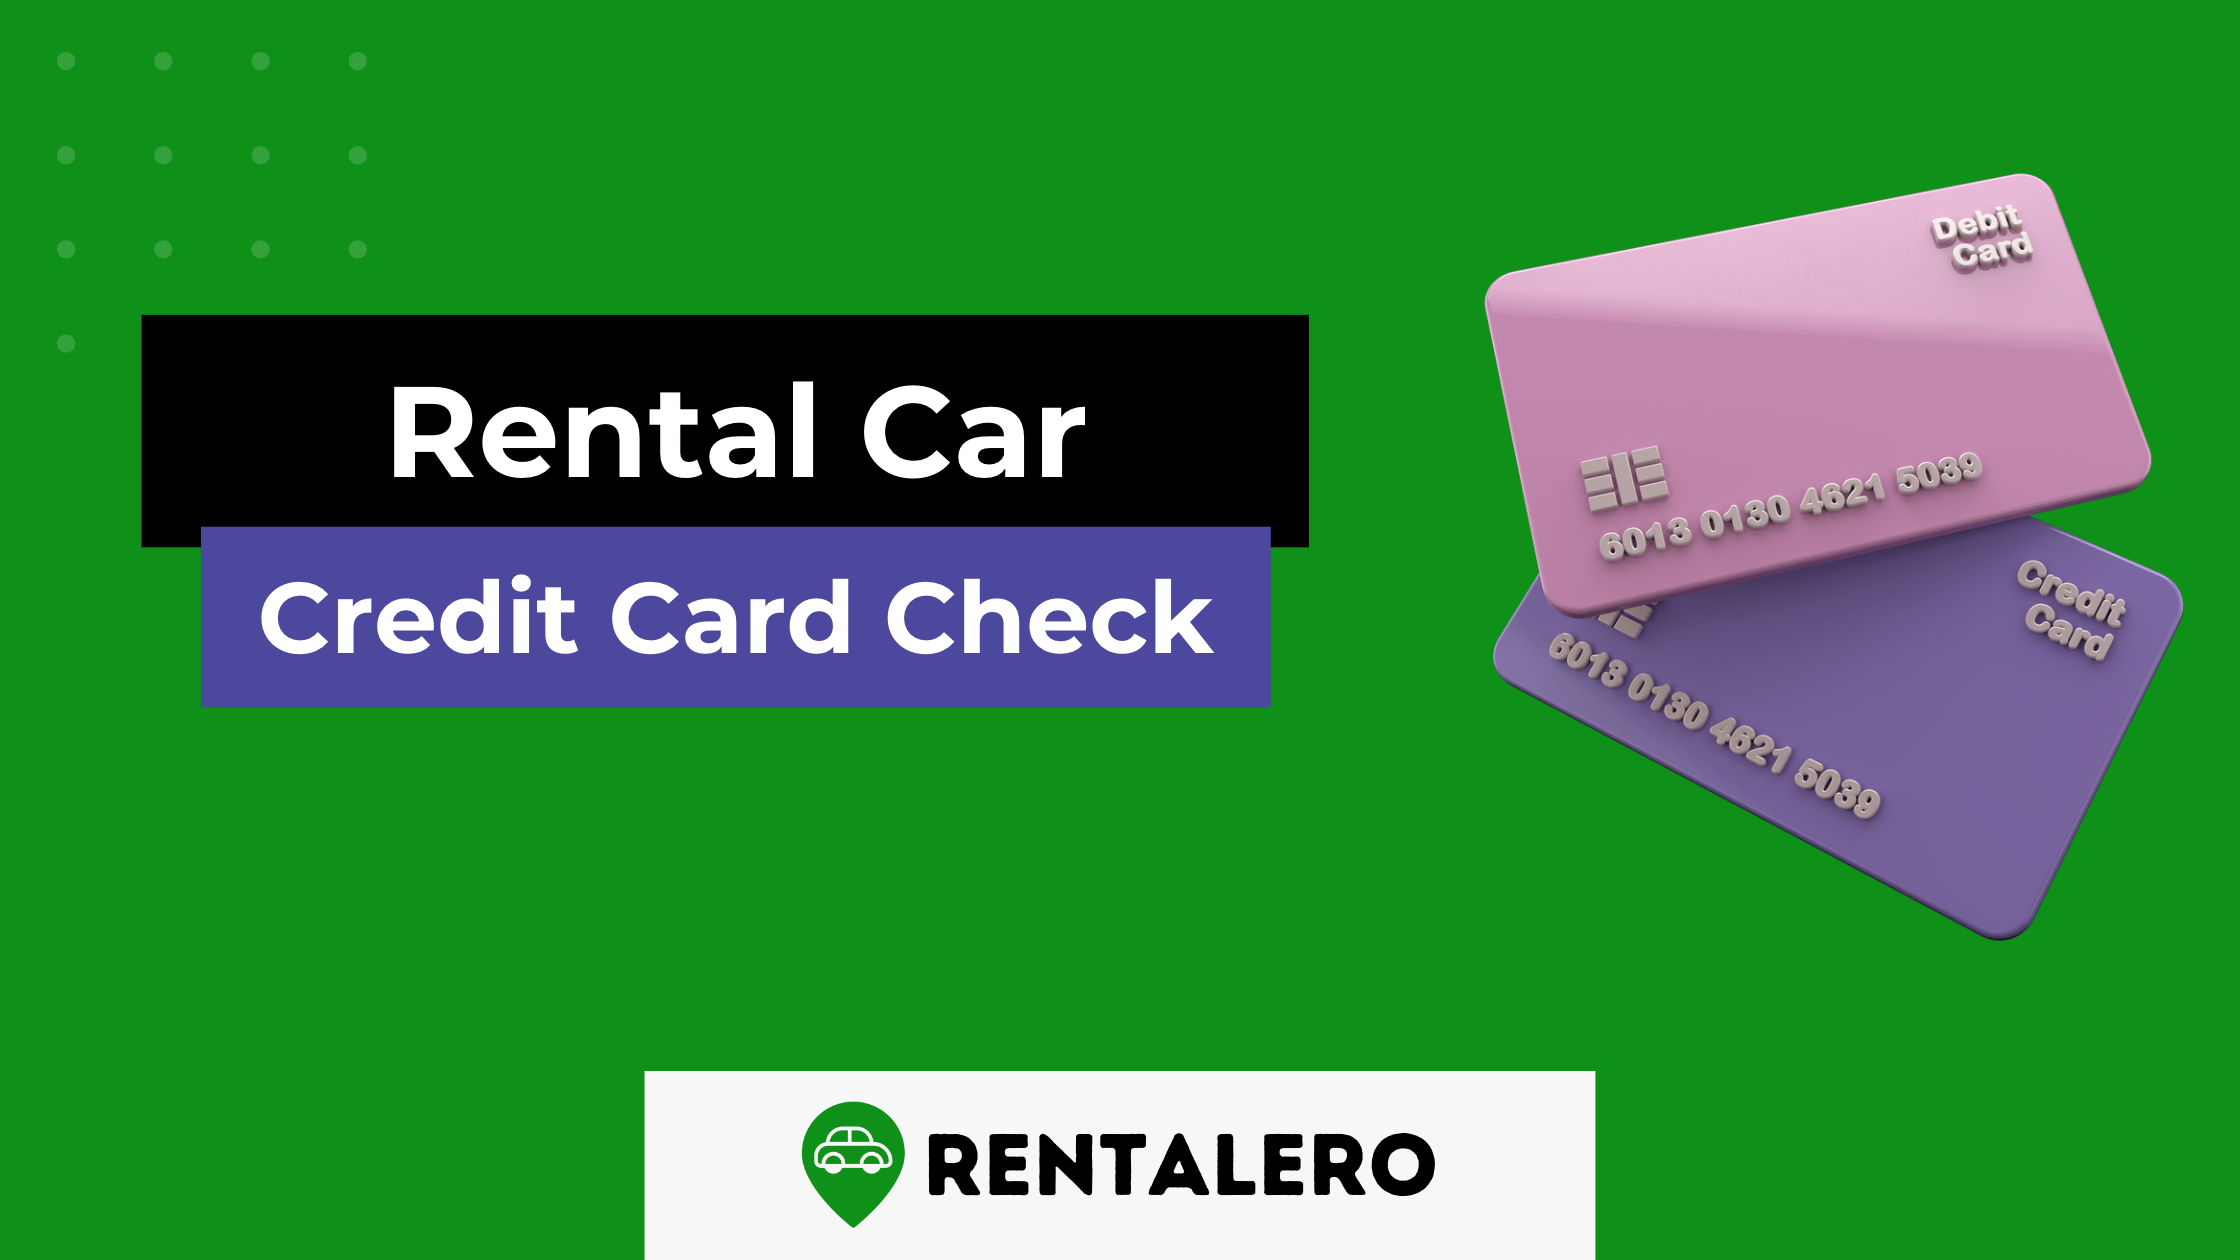 What Do Rental Car Companies Look For in Credit Checks?